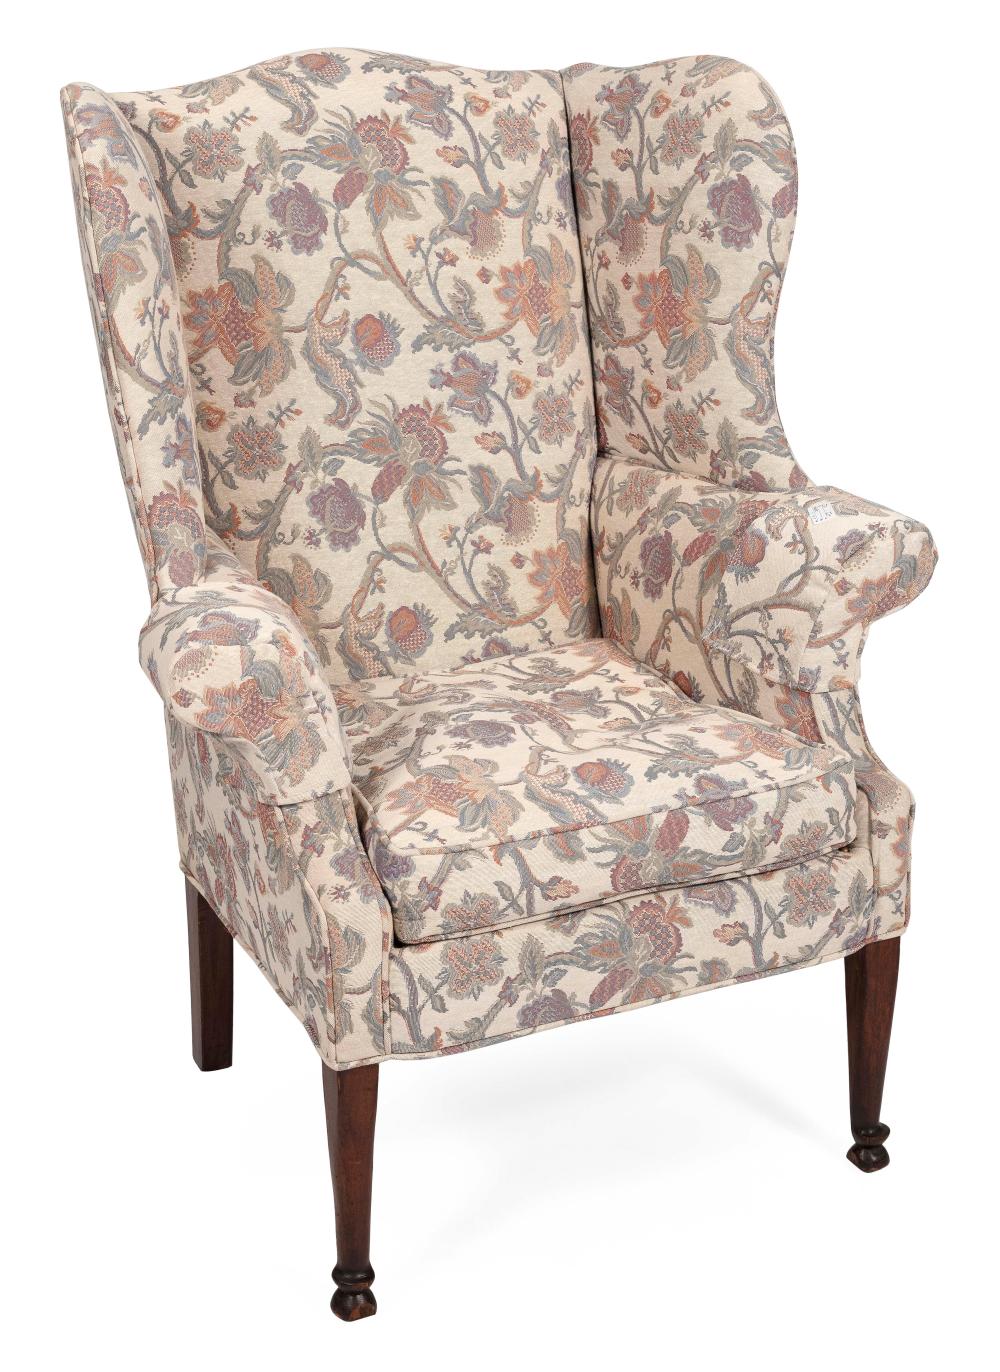 ENGLISH QUEEN ANNE STYLE WING CHAIR 34ec31